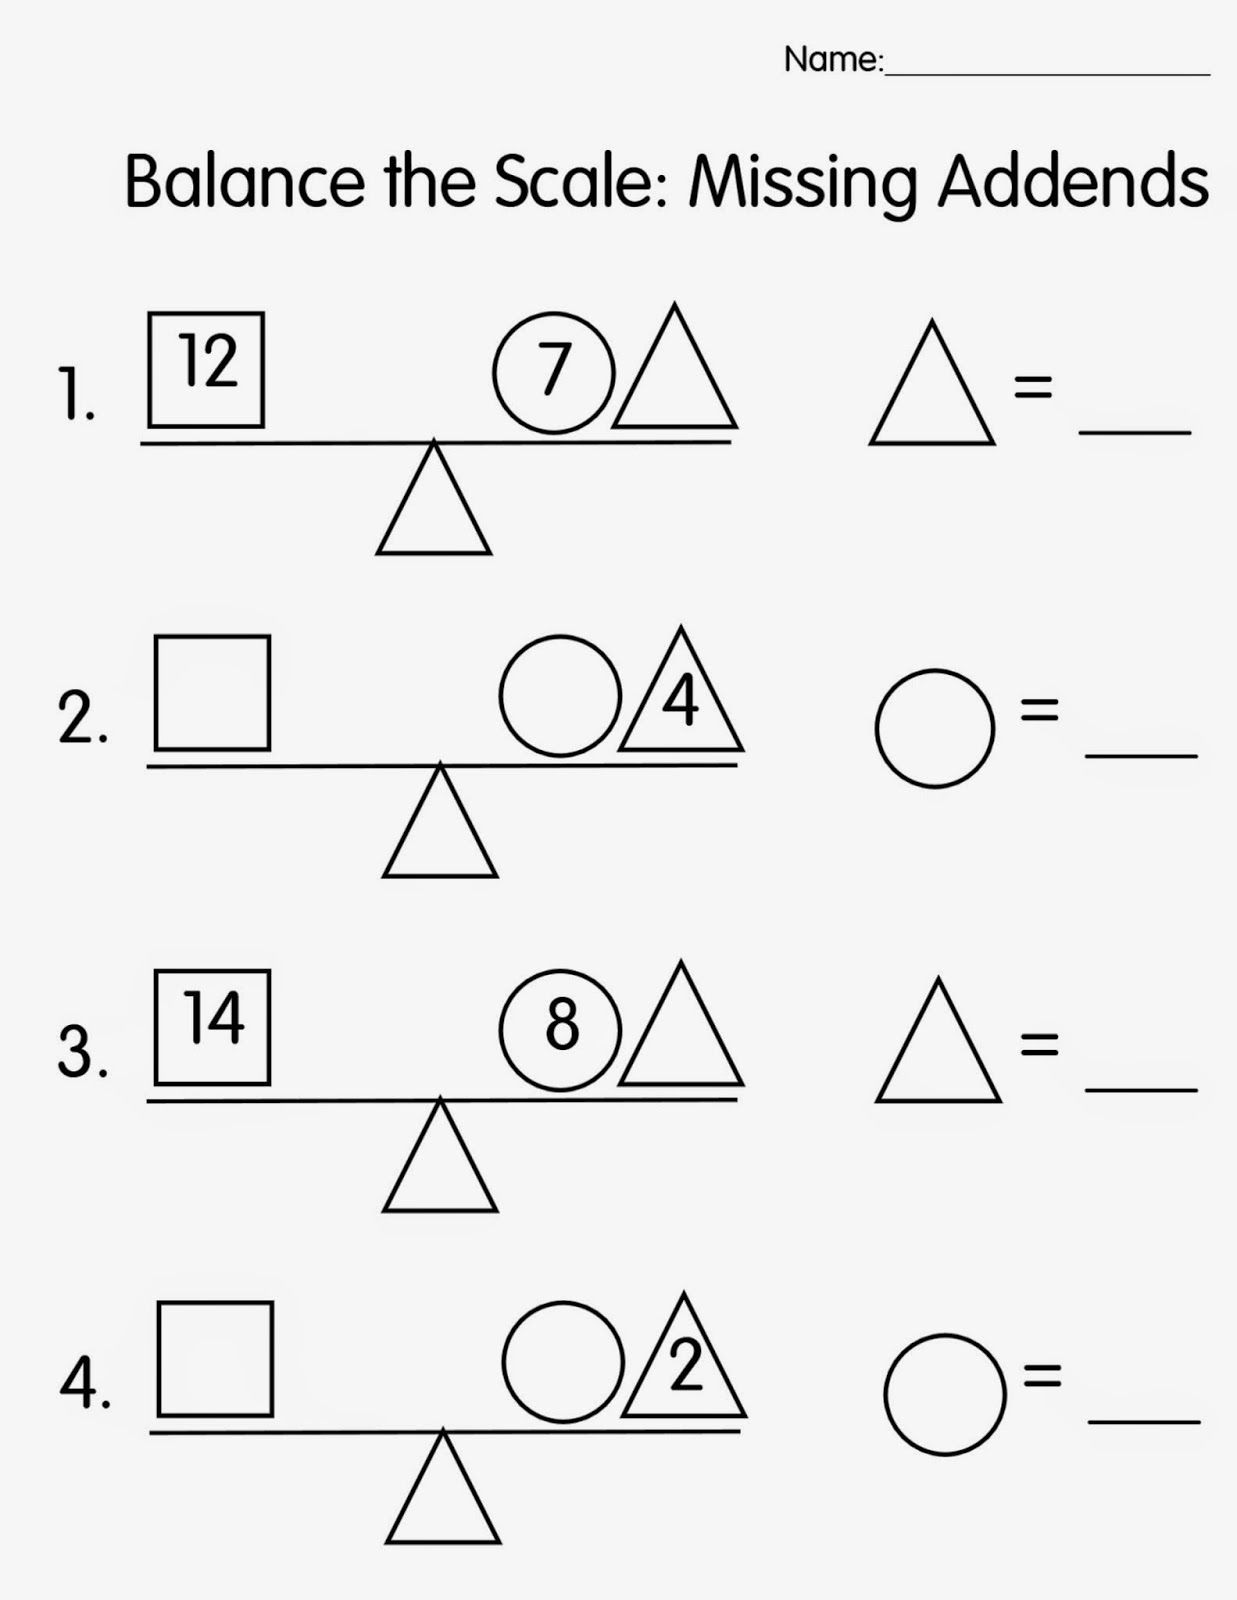 free balance the scale missing addends 4 worksheets love this